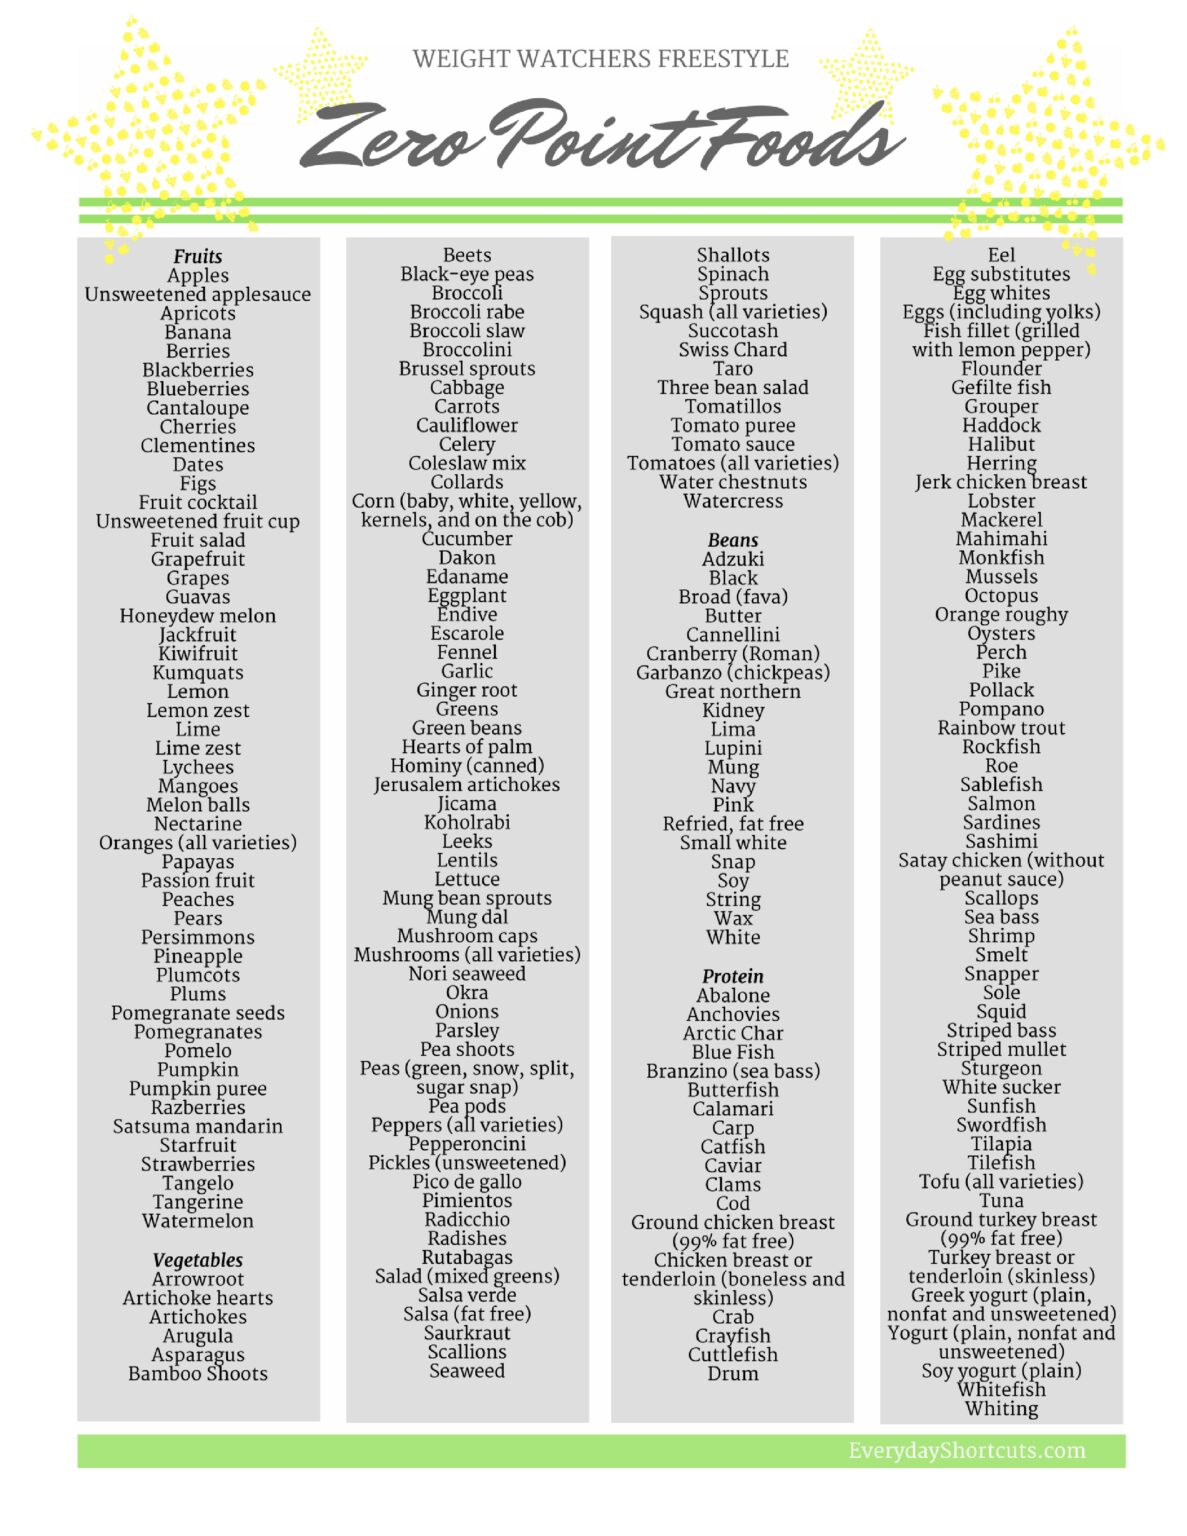 Weight Watchers Freestyle Zero Point Food Everyday Shortcuts 1187x1536 